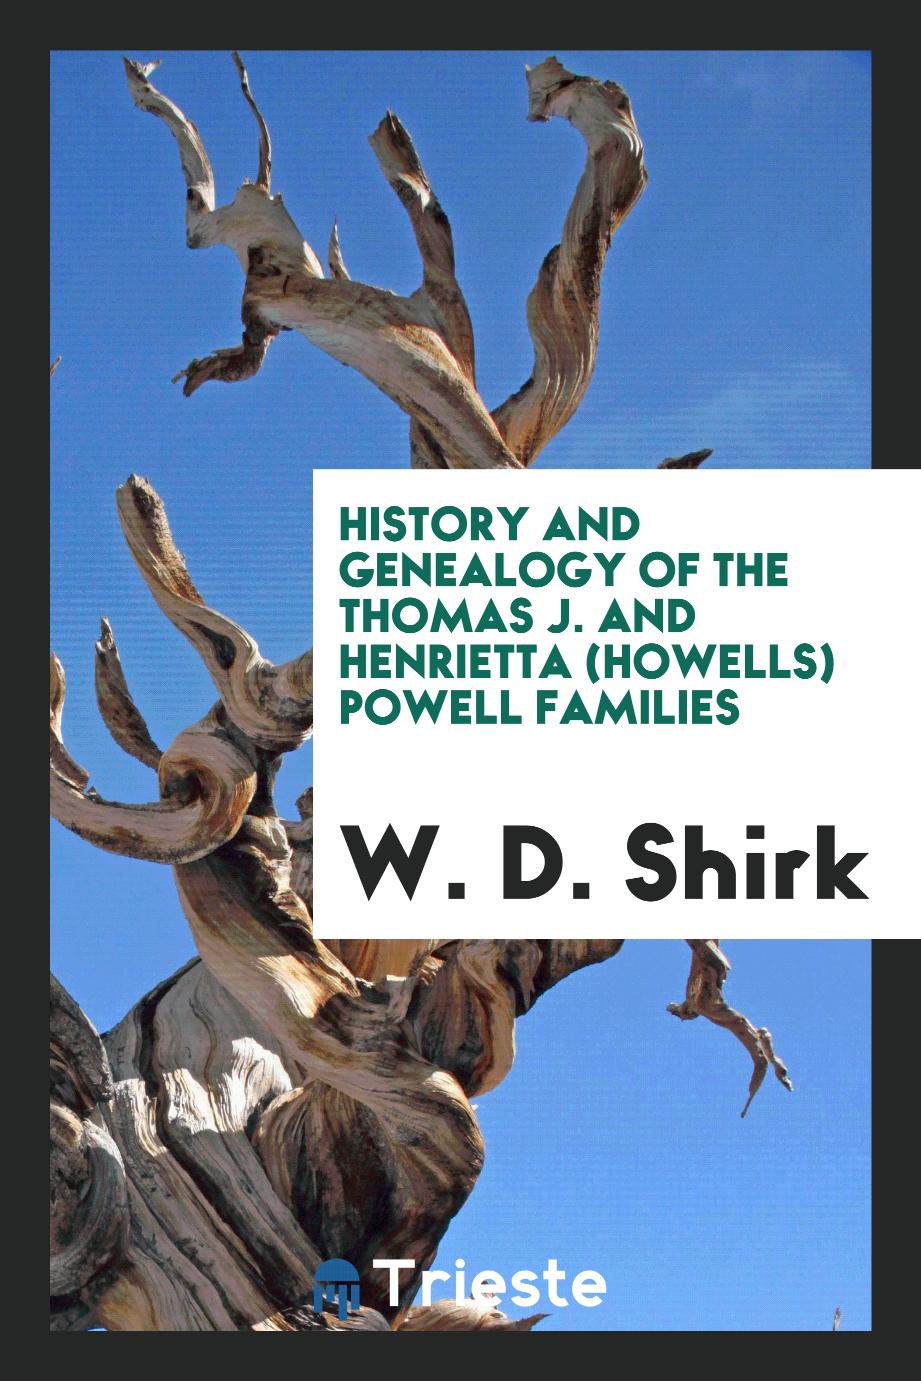 History and Genealogy of the Thomas J. and Henrietta (Howells) Powell Families